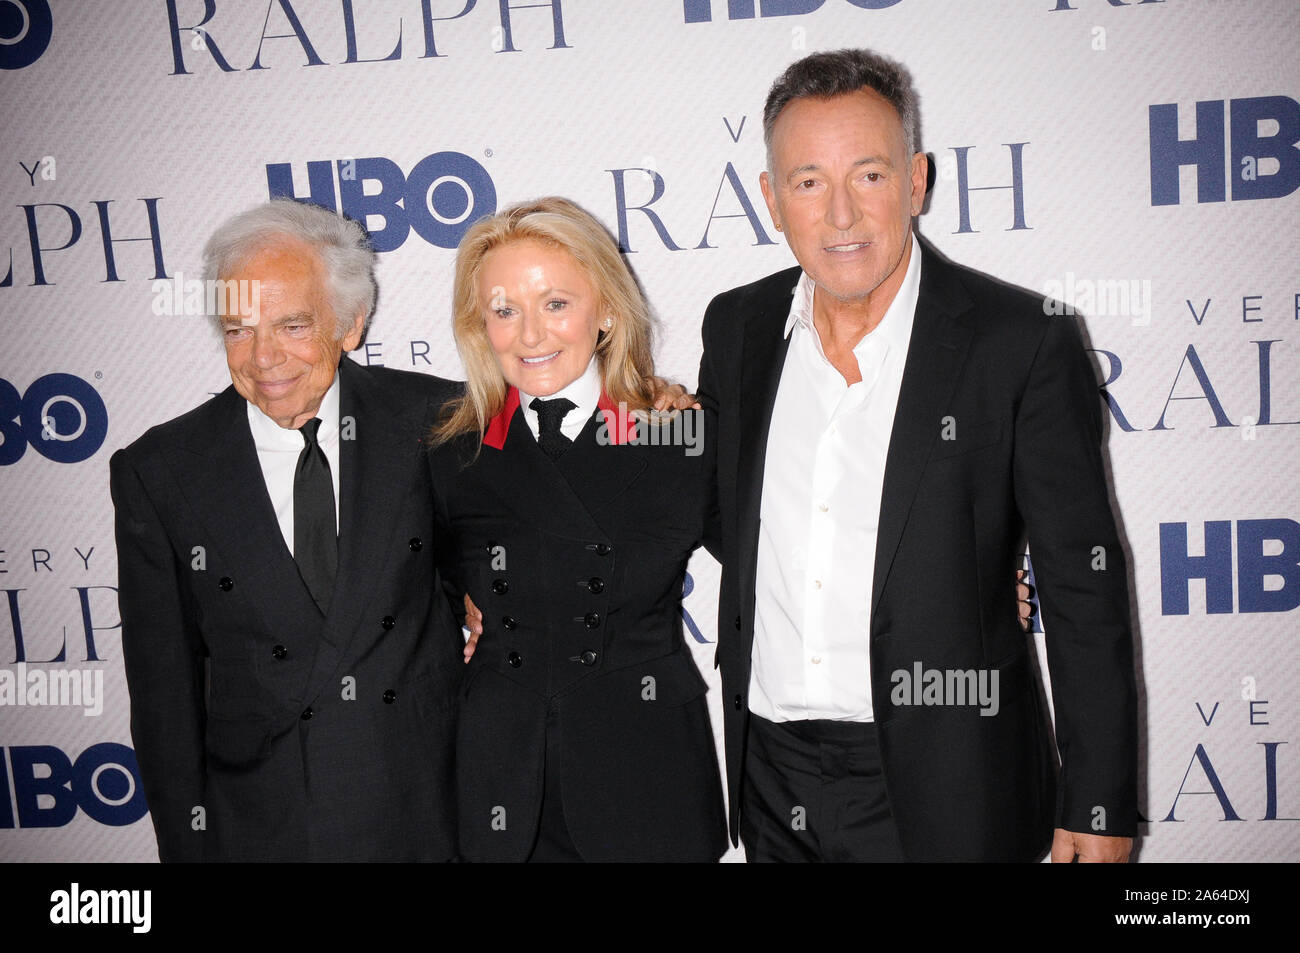 New York, United States. 23rd Oct, 2019. (L-R) Ralph Lauren, Ricky Lauren  and Bruce Springsteen attend(s) the VERY RALPH film premiere held at the  Metropolitan Museum of Art in New York City.